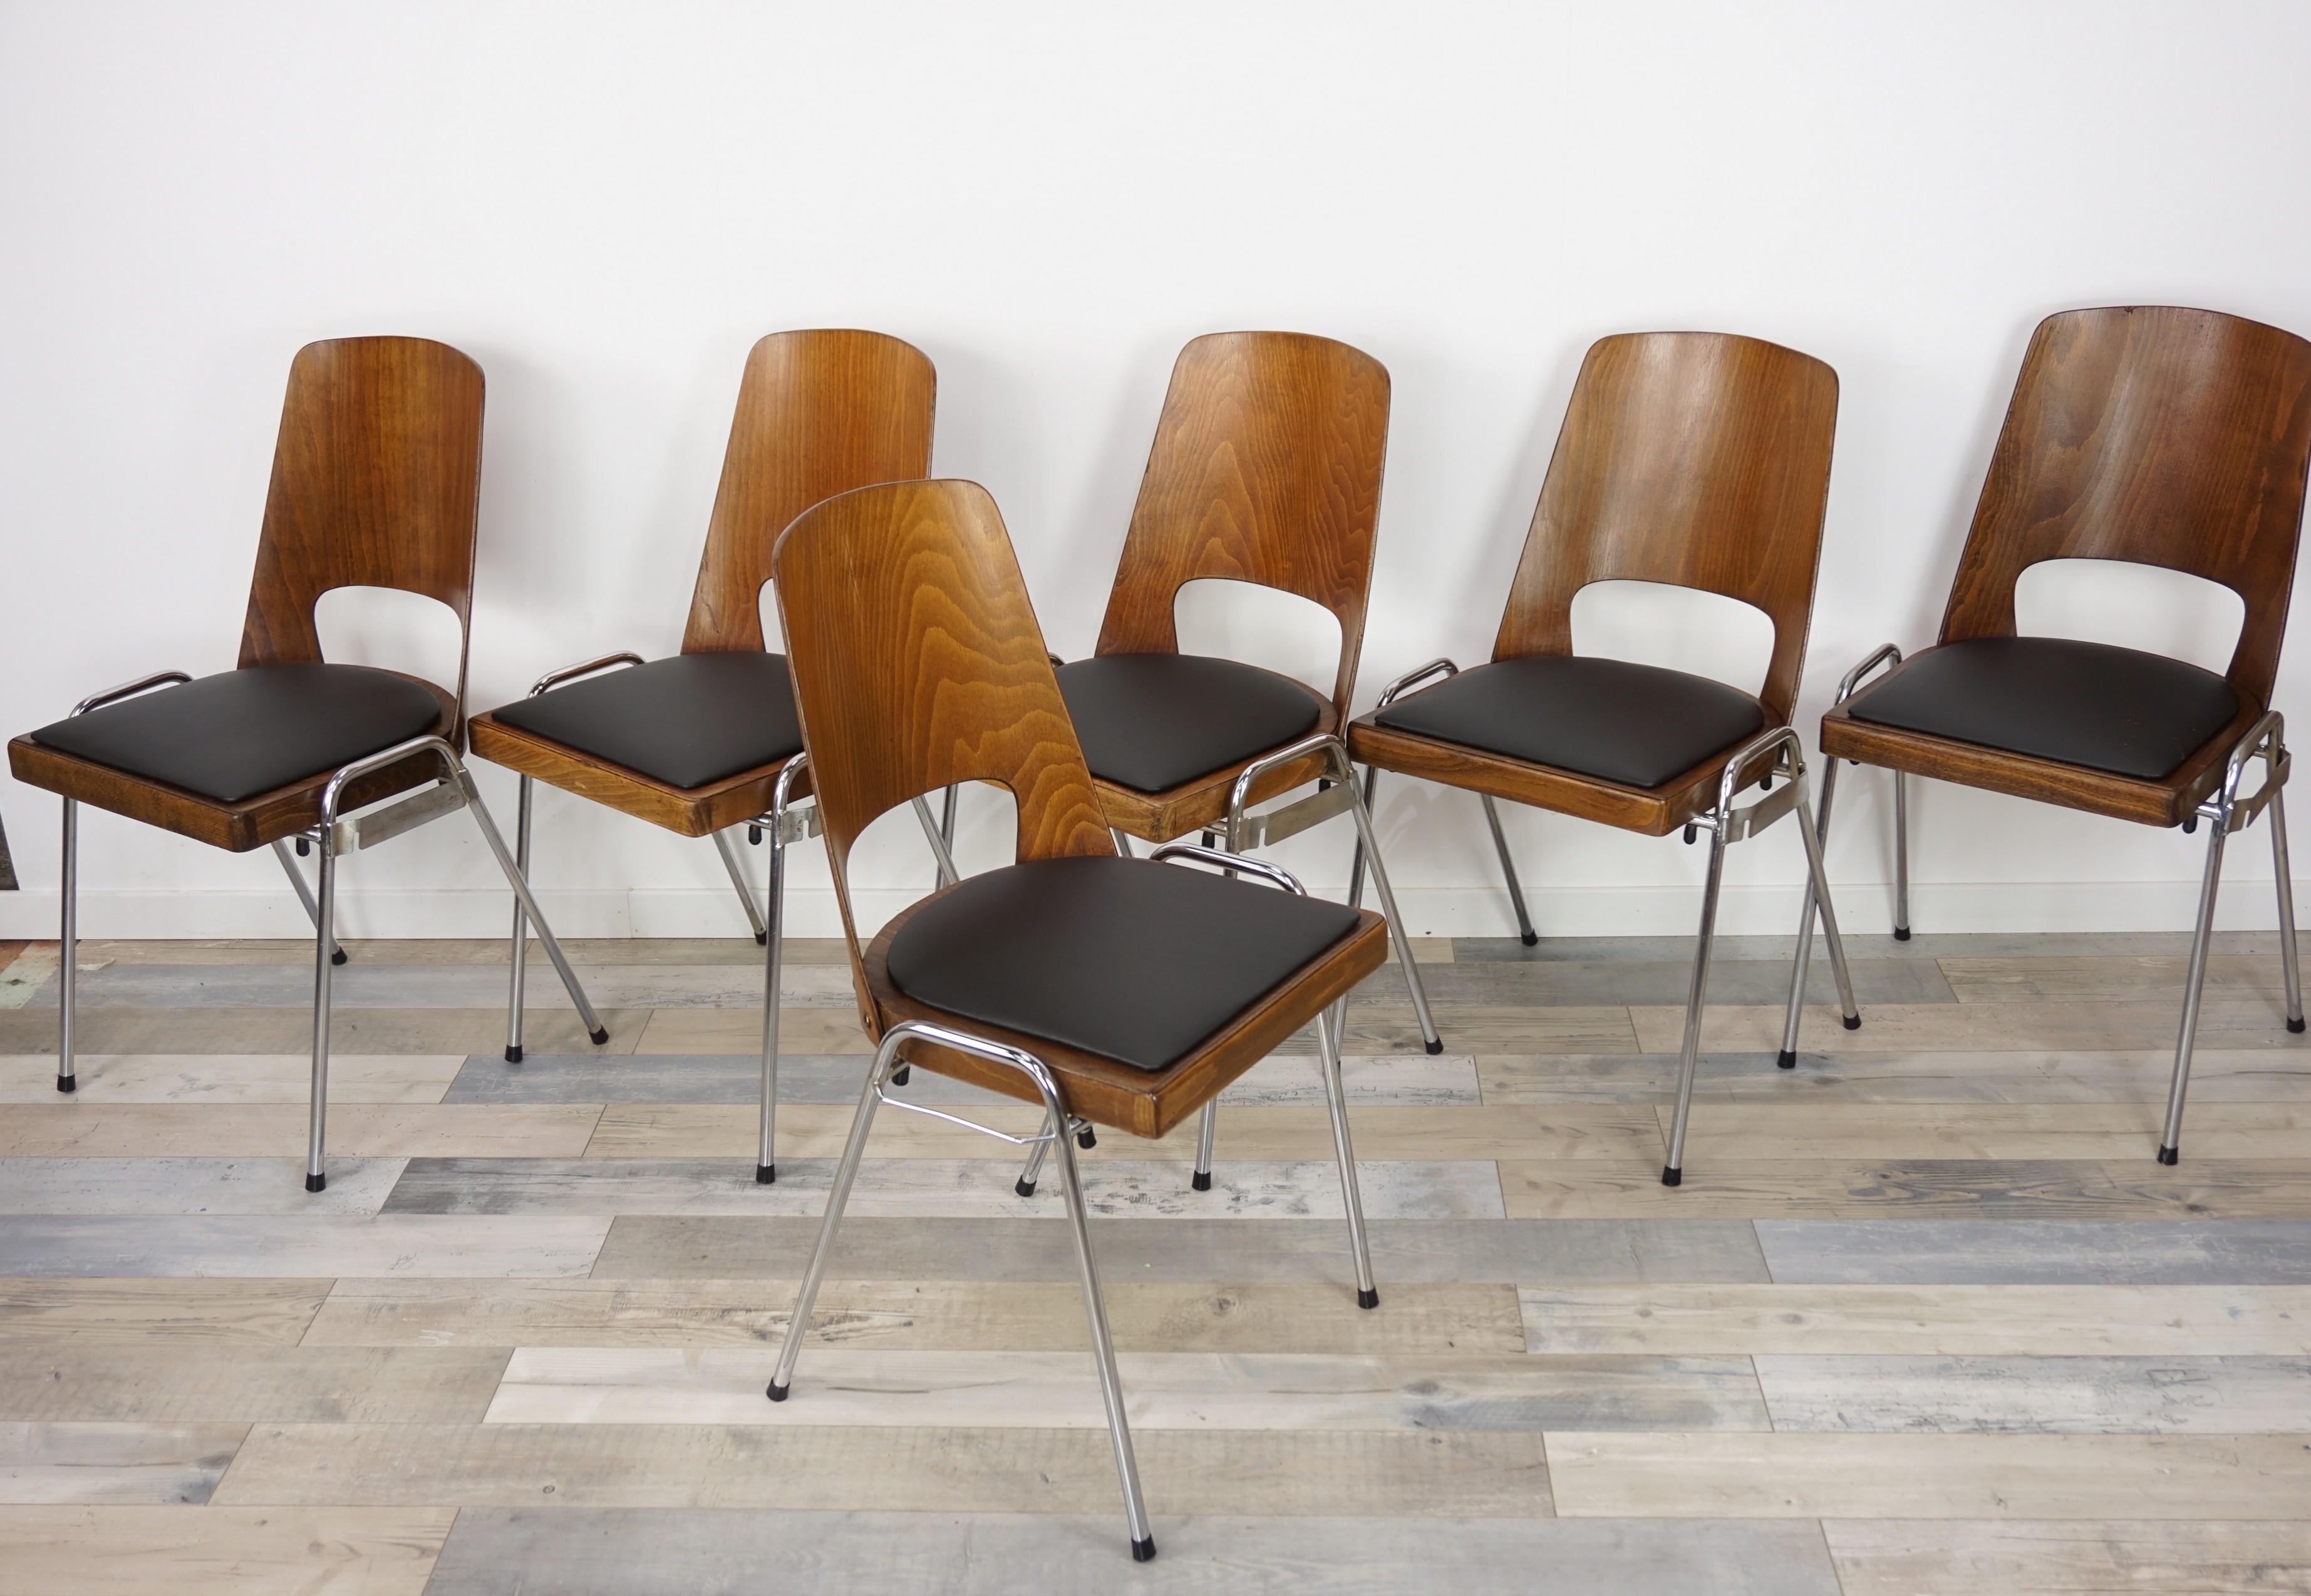 Set of six chairs, industrial and retro look French design by Baumann Edition from the 1960s, composed of a chrome base feet, a plywood shell wearing a comfy black faux leather seat.